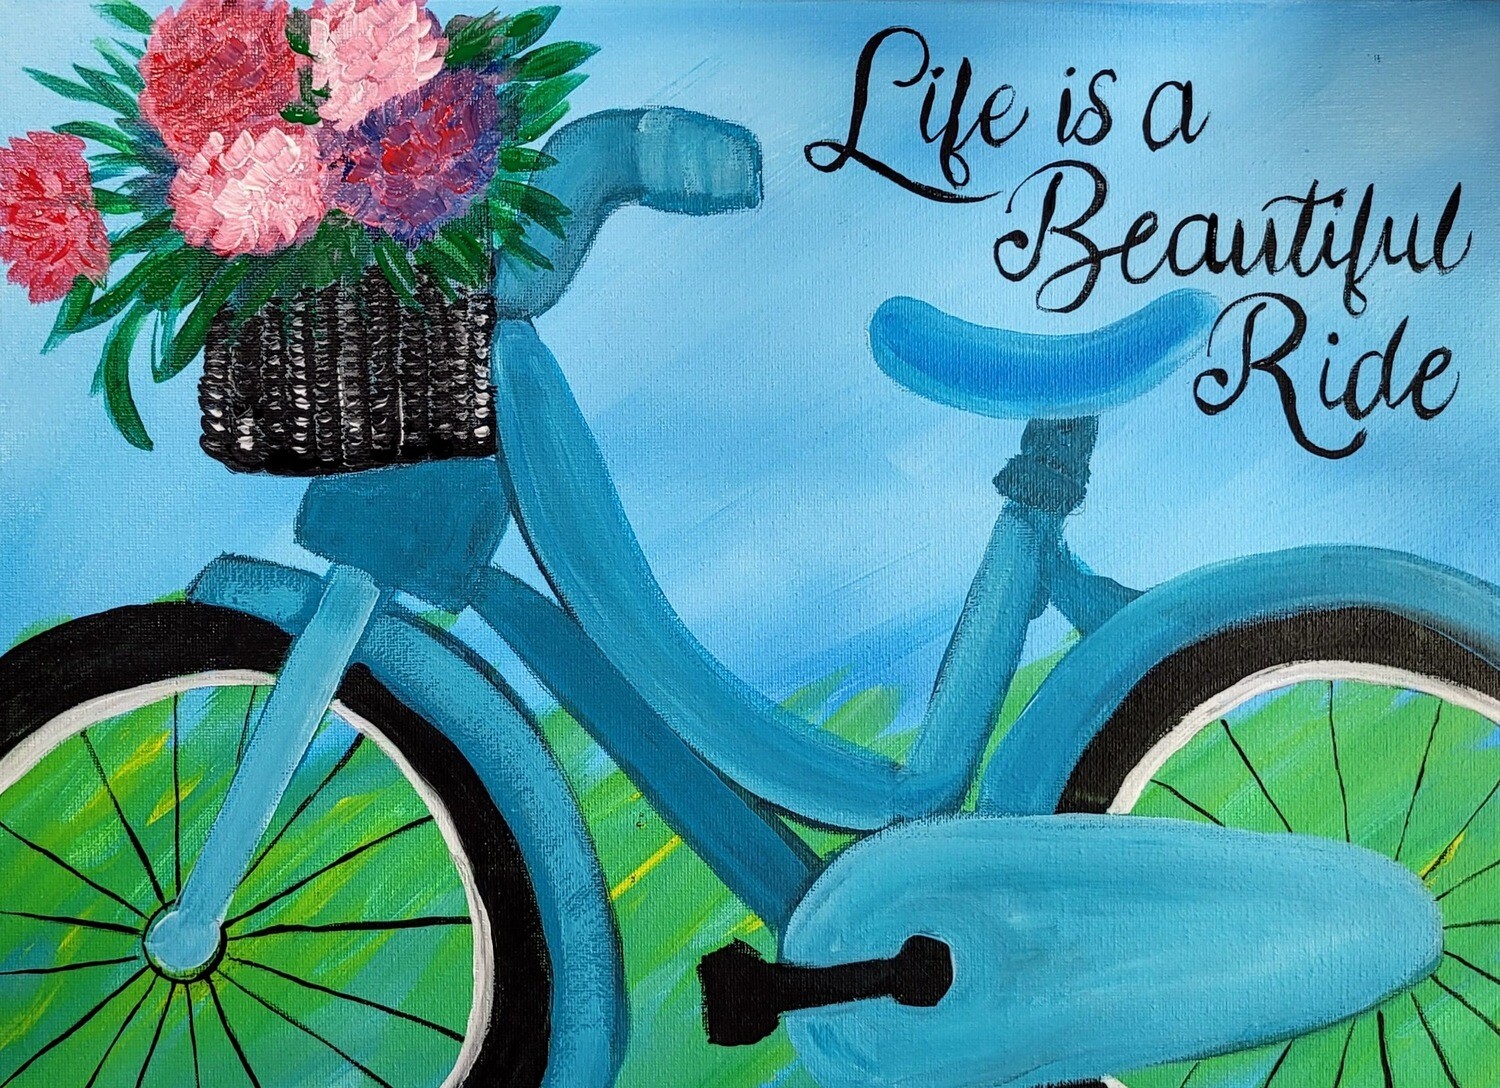 ART KIT: Bicycle, Life is a Beautiful Ride